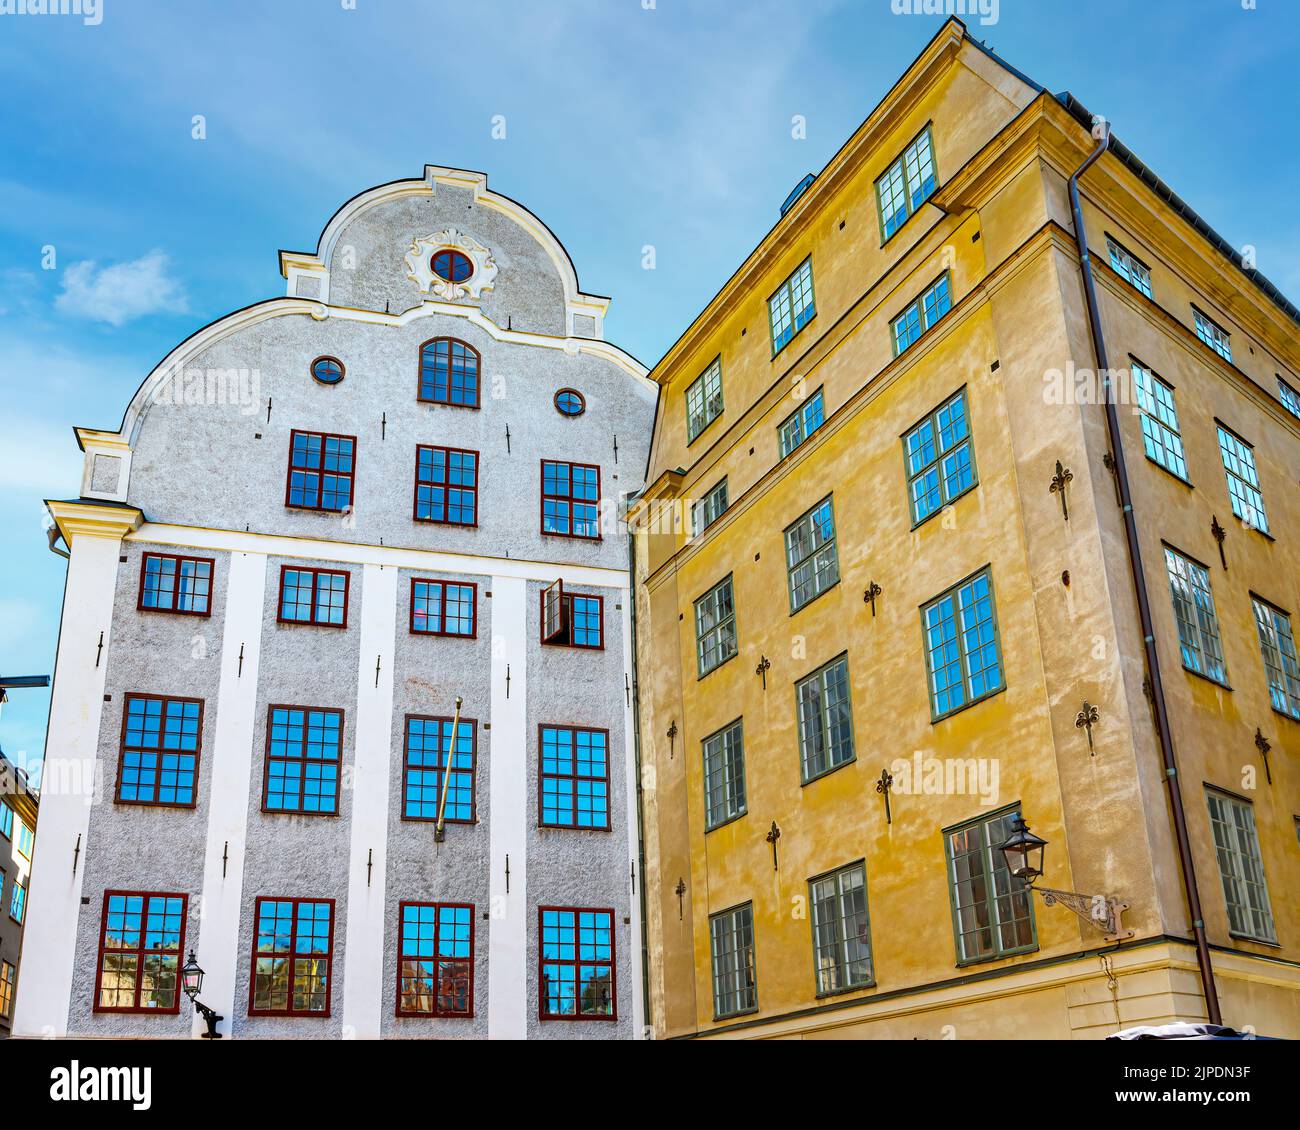 STOCKHOLM, SWEDEN - JULY 31, 2022: This cobblestone plaza dating back to the Middle Ages has colorful historic buildings Stock Photo